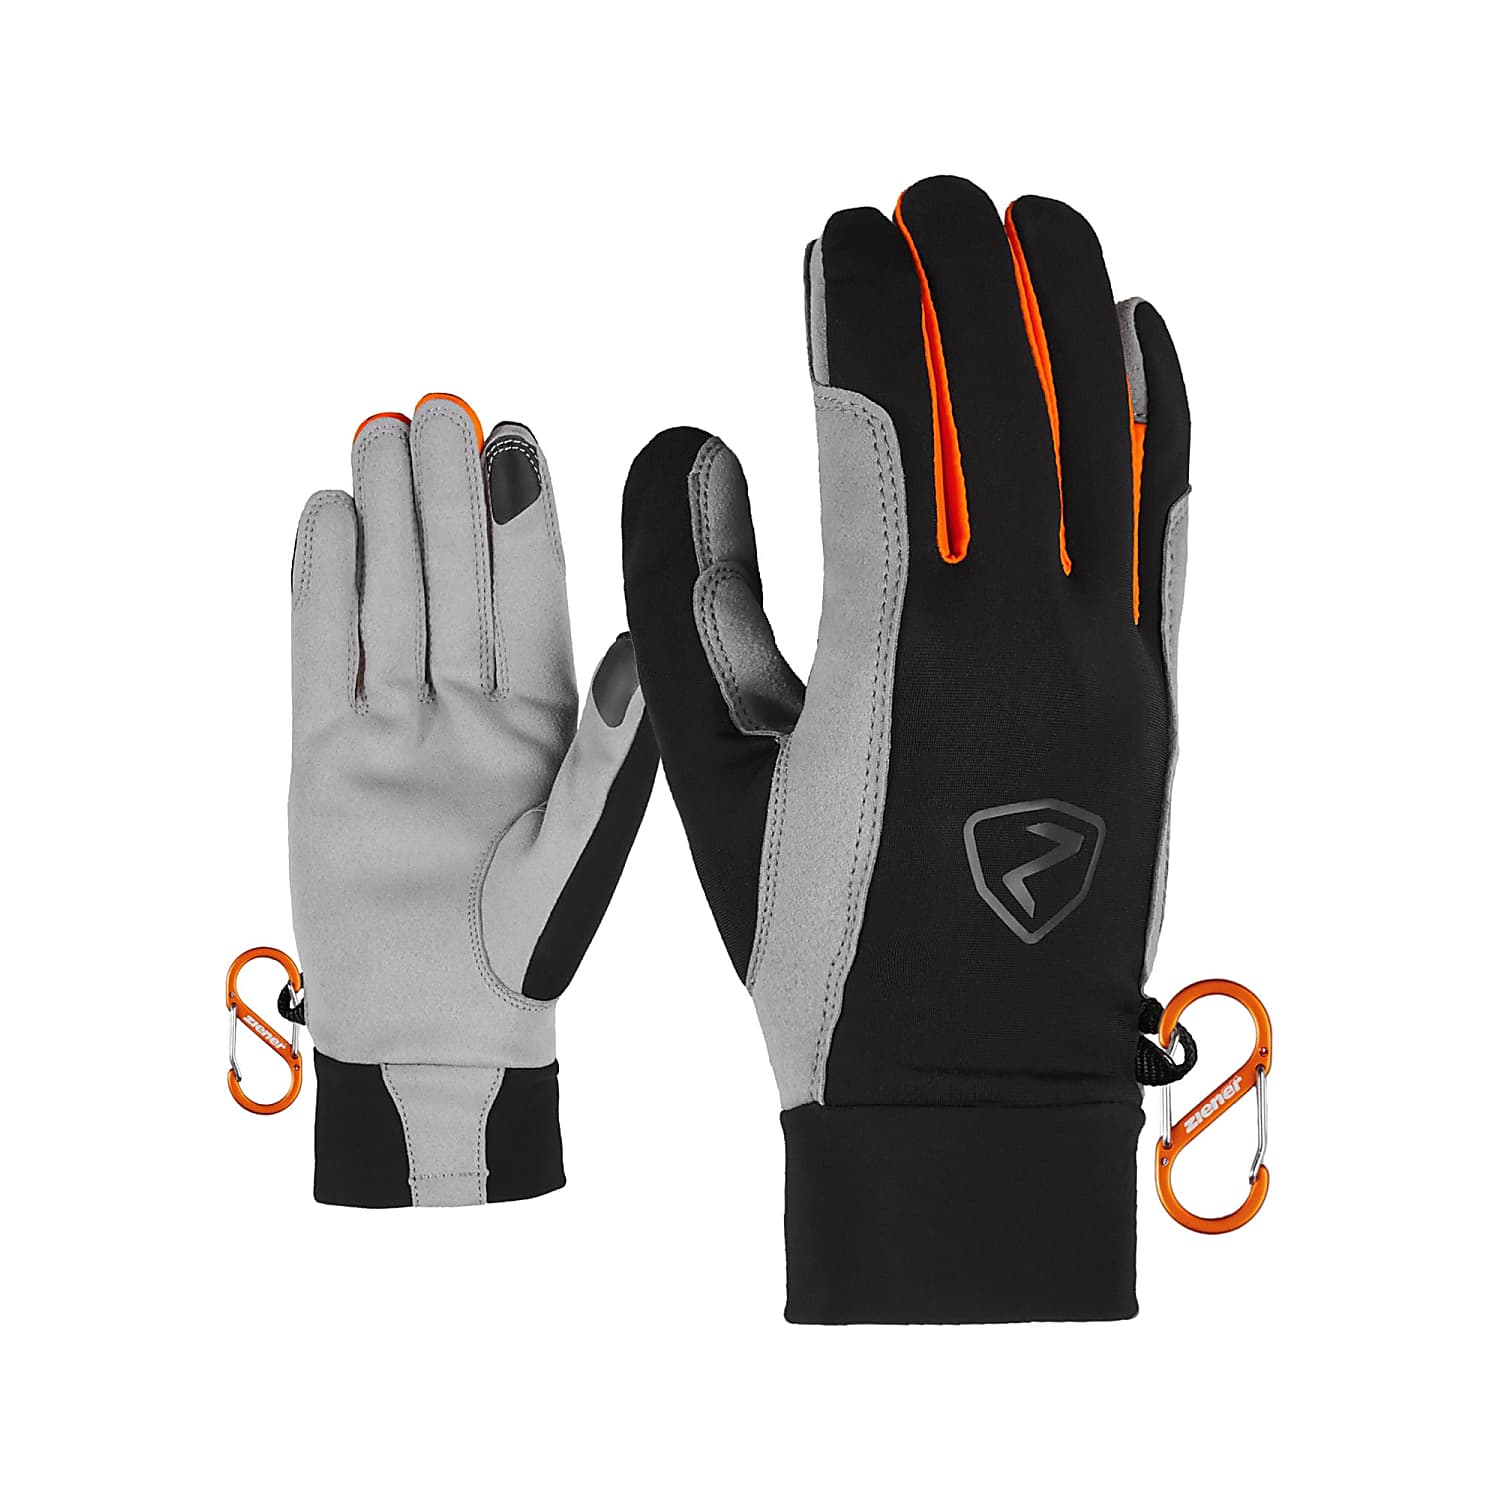 Ziener GUSTY TOUCH GLOVE, Black - New Orange - Fast and cheap shipping